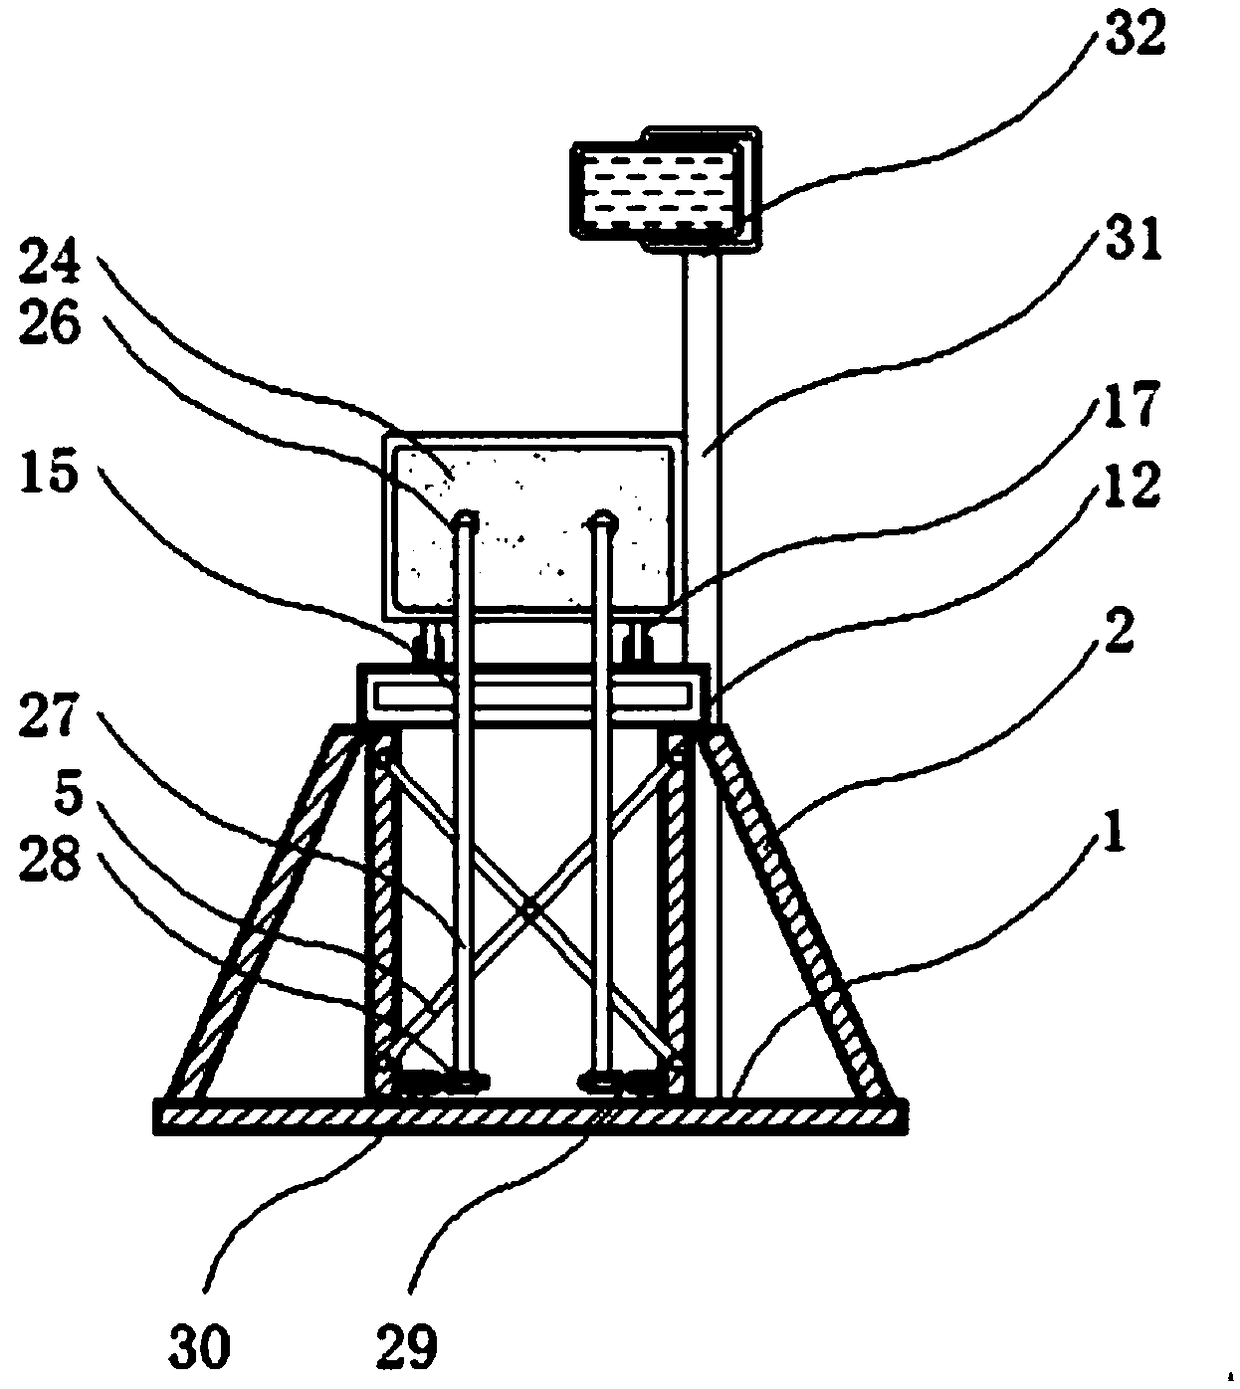 Alarm guiding lamp with an omnidirectional adjustment function for traffic evacuation